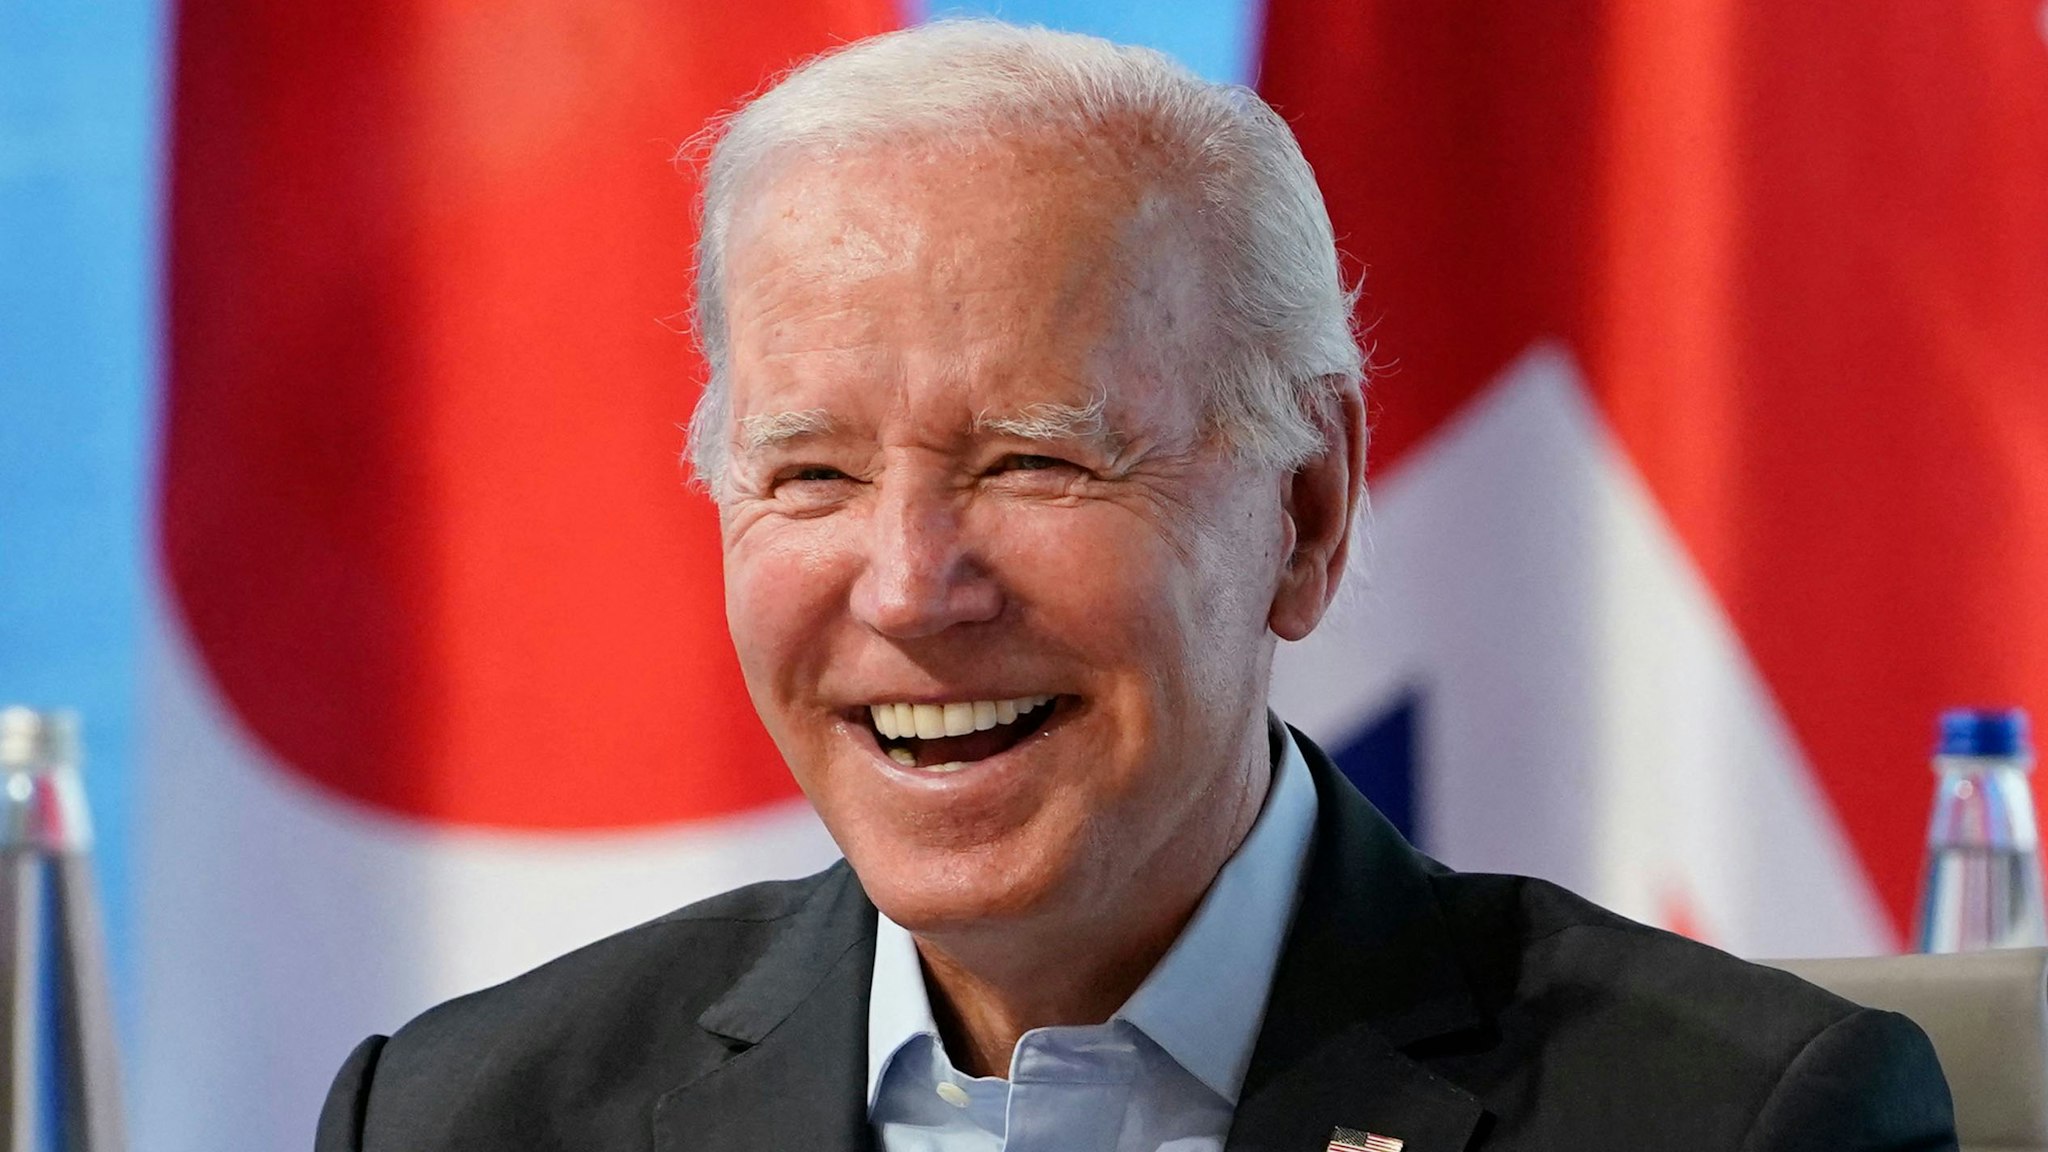 US President Joe Biden smiles at the start of a lunch with Representatives of Seven rich nations (G7) and Outreach guests during their fifth working session about Investing in a better future: Climate, Energy, Health on June 27, 2022 at Elmau Castle, southern Germany, during the G7 Summit. - G7 leaders are under pressure to hold fast to climate pledges when they meet in Bavaria from June 26 to 28, as Russia's energy cuts trigger a dash back to planet-heating fossil fuels.